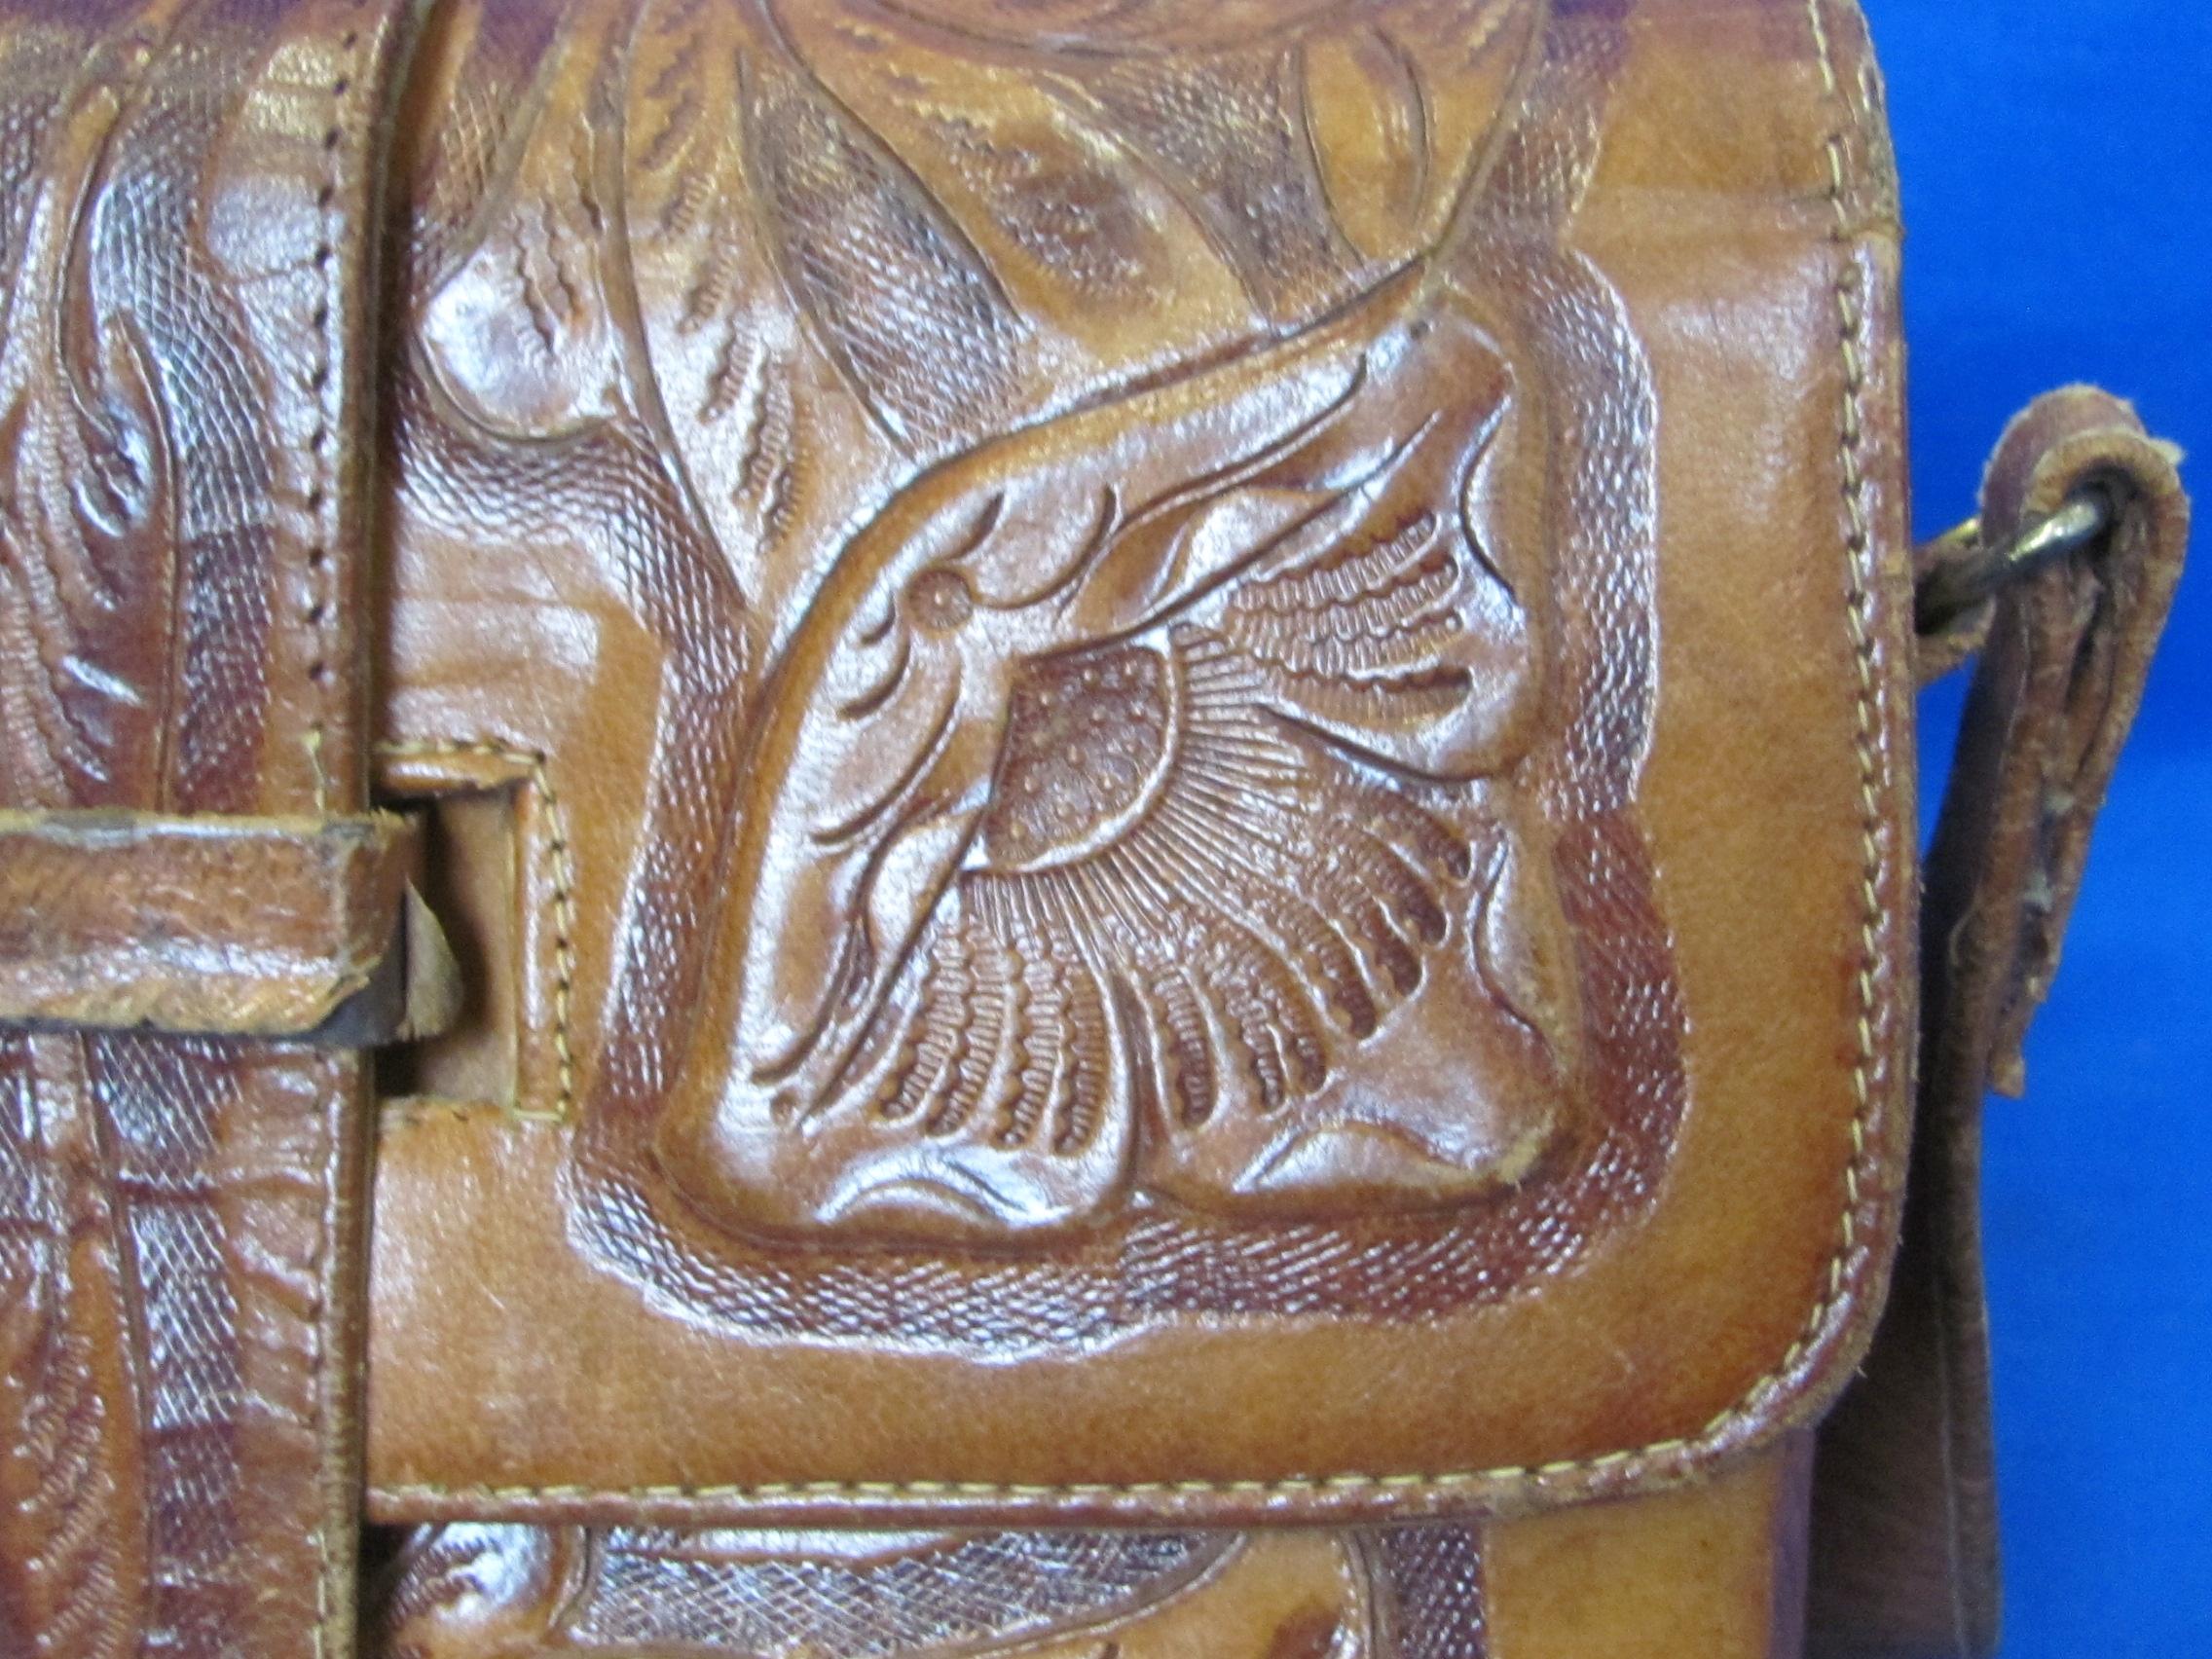 Vintage Tooled Leather Purse – Floral Design – About 8 1/2” x 6 1/2” - Straps need buckle